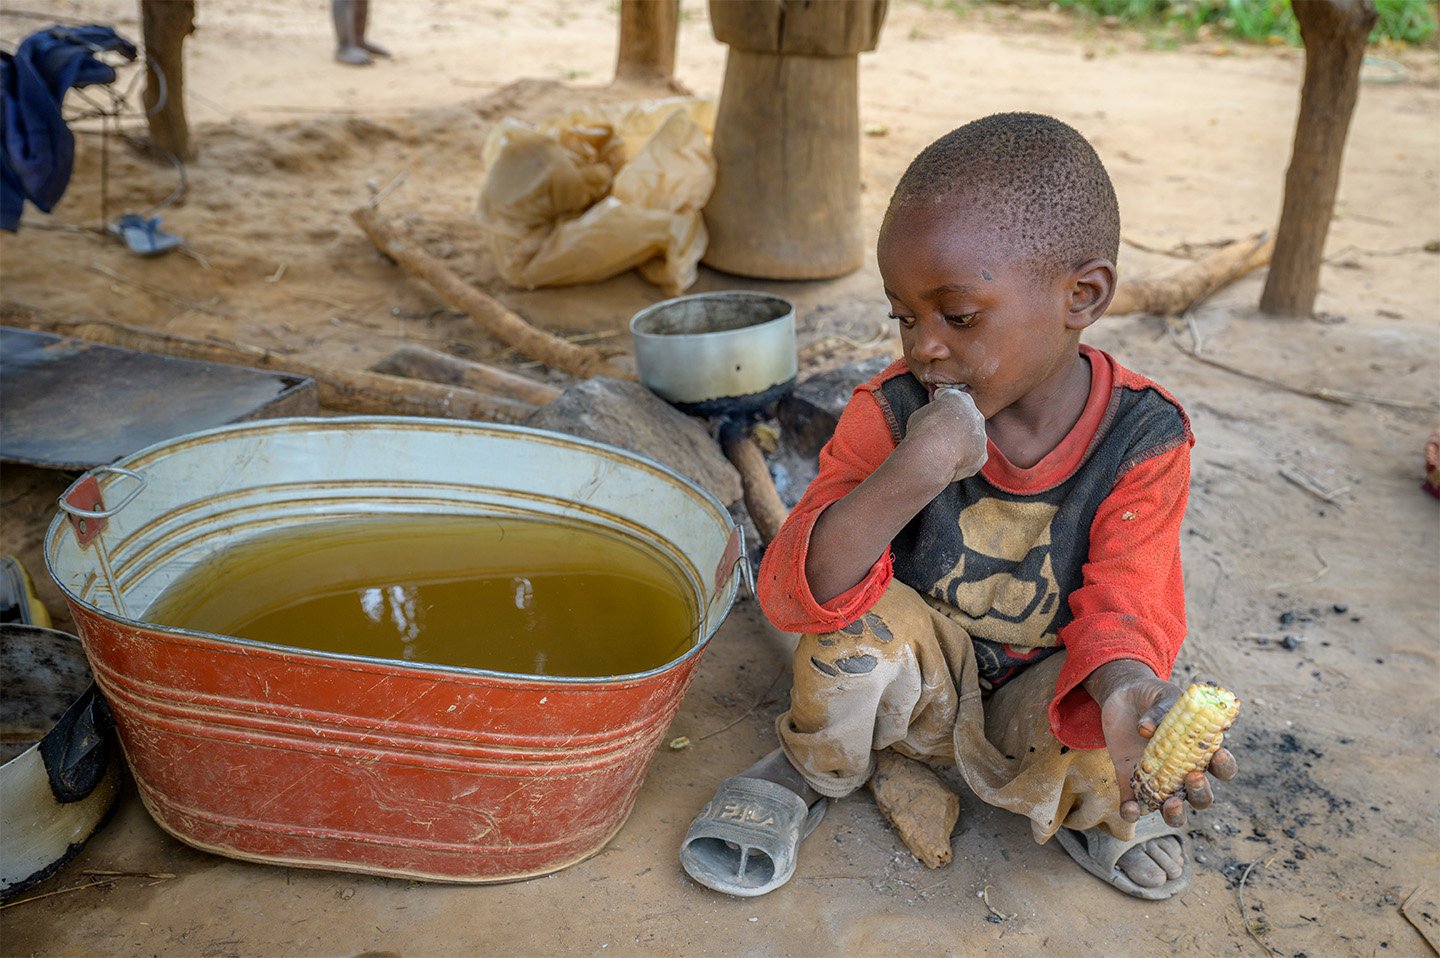 Wearing torn yellow pants and dusty sandals, a young boy squats in the dirt by a metal tub of dirty water in Zambia.